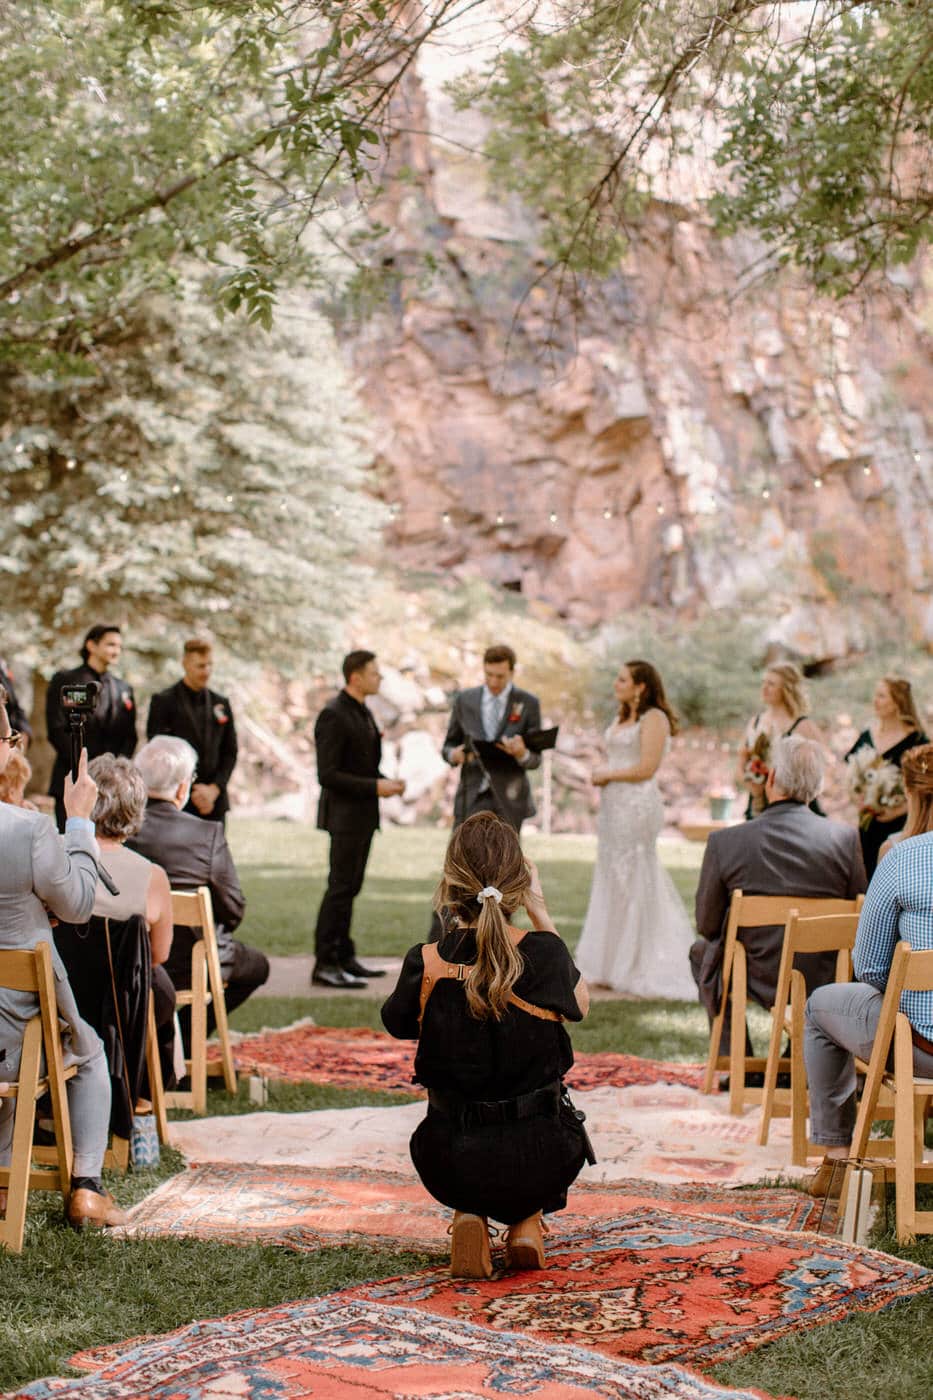 Colorado wedding photographer capturing emotional vows during the ceremony with a Persian rug aisle.